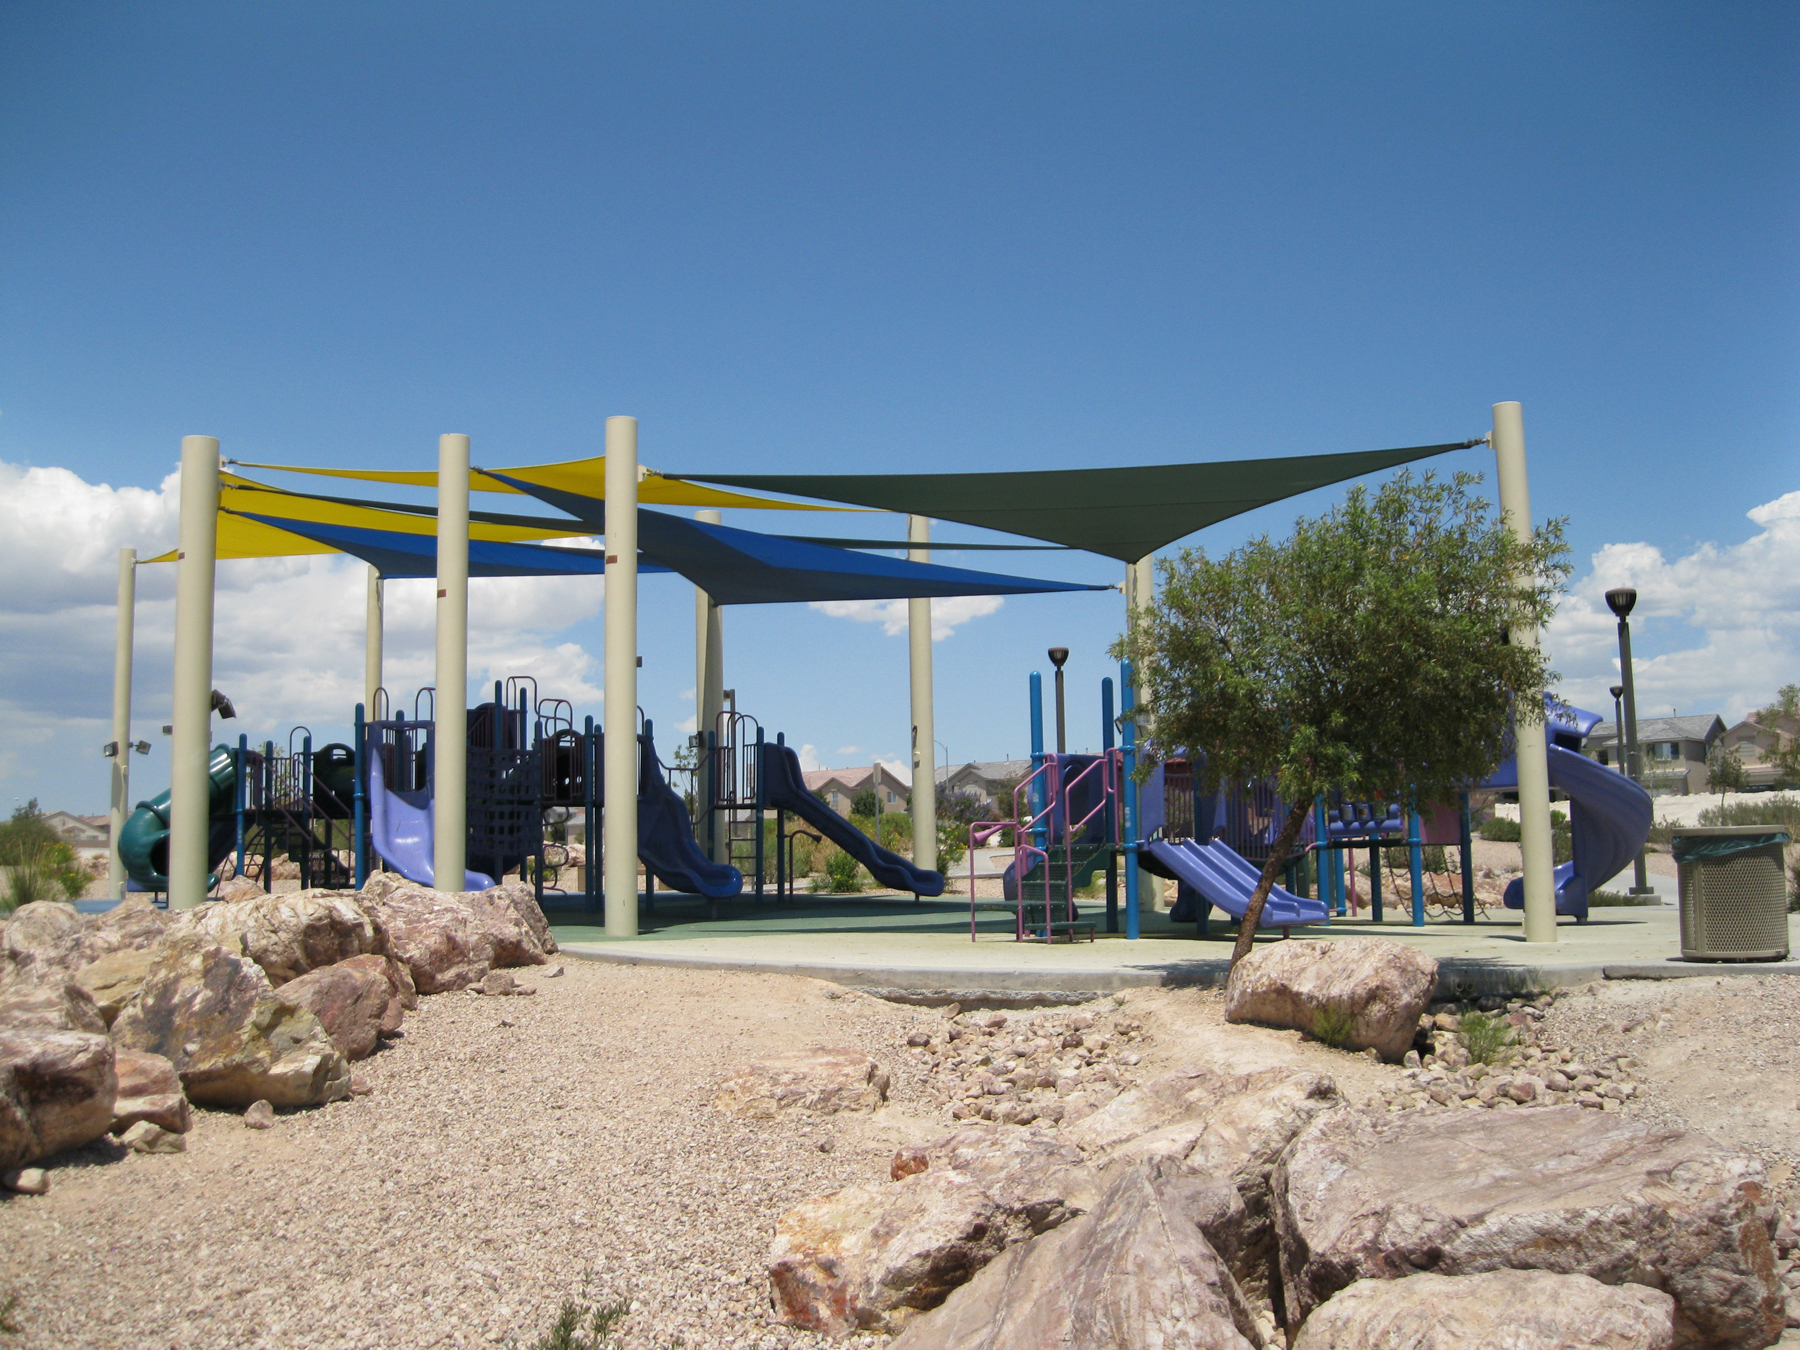 colorful triangle shades covering outdoor playground